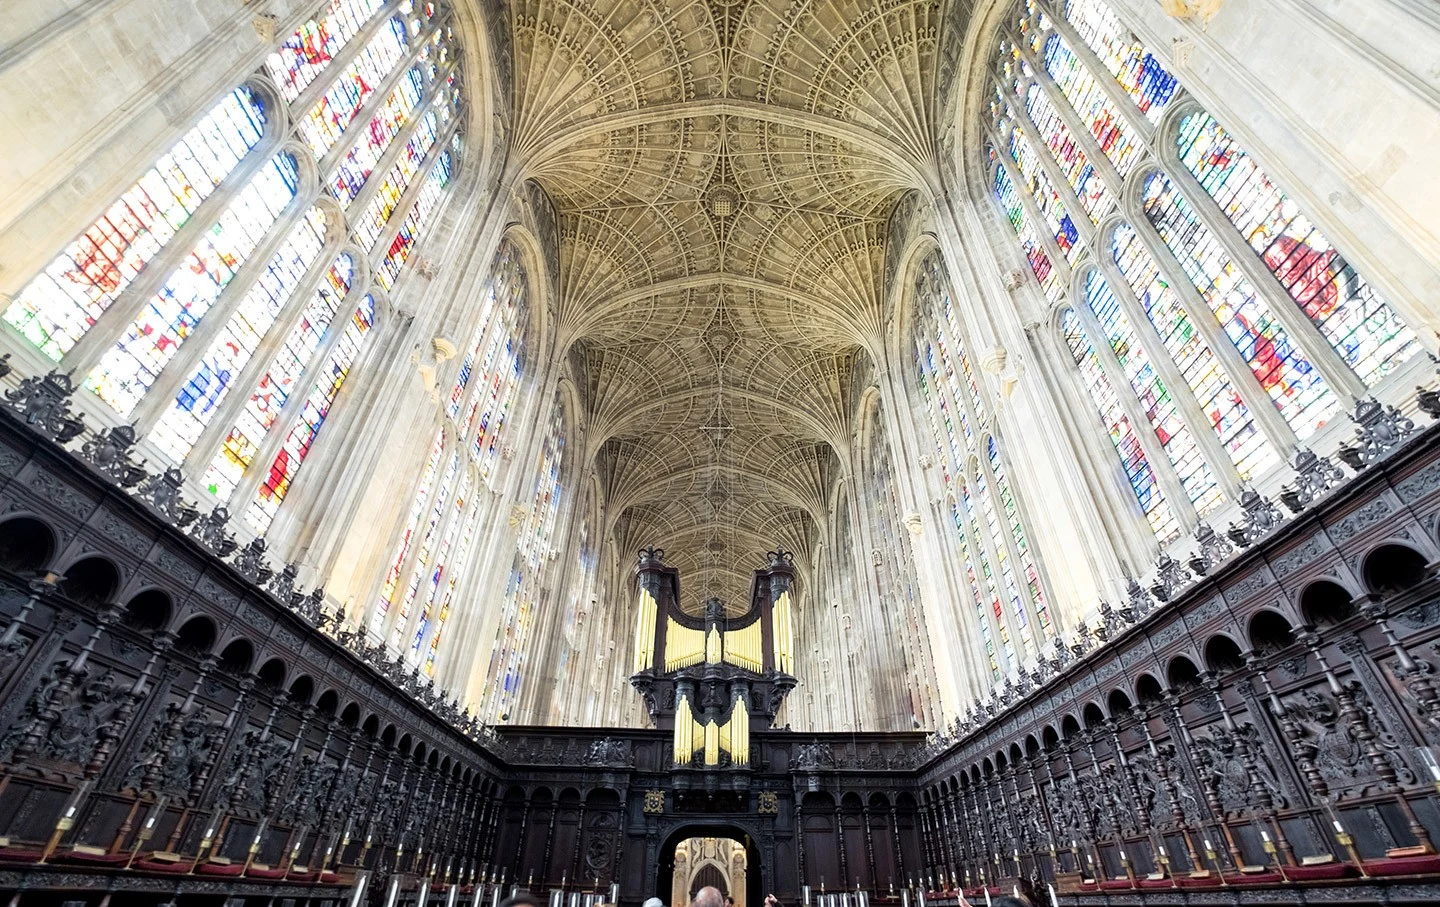 The fan-vaulted ceiling of King's College Chapel in Cambridge